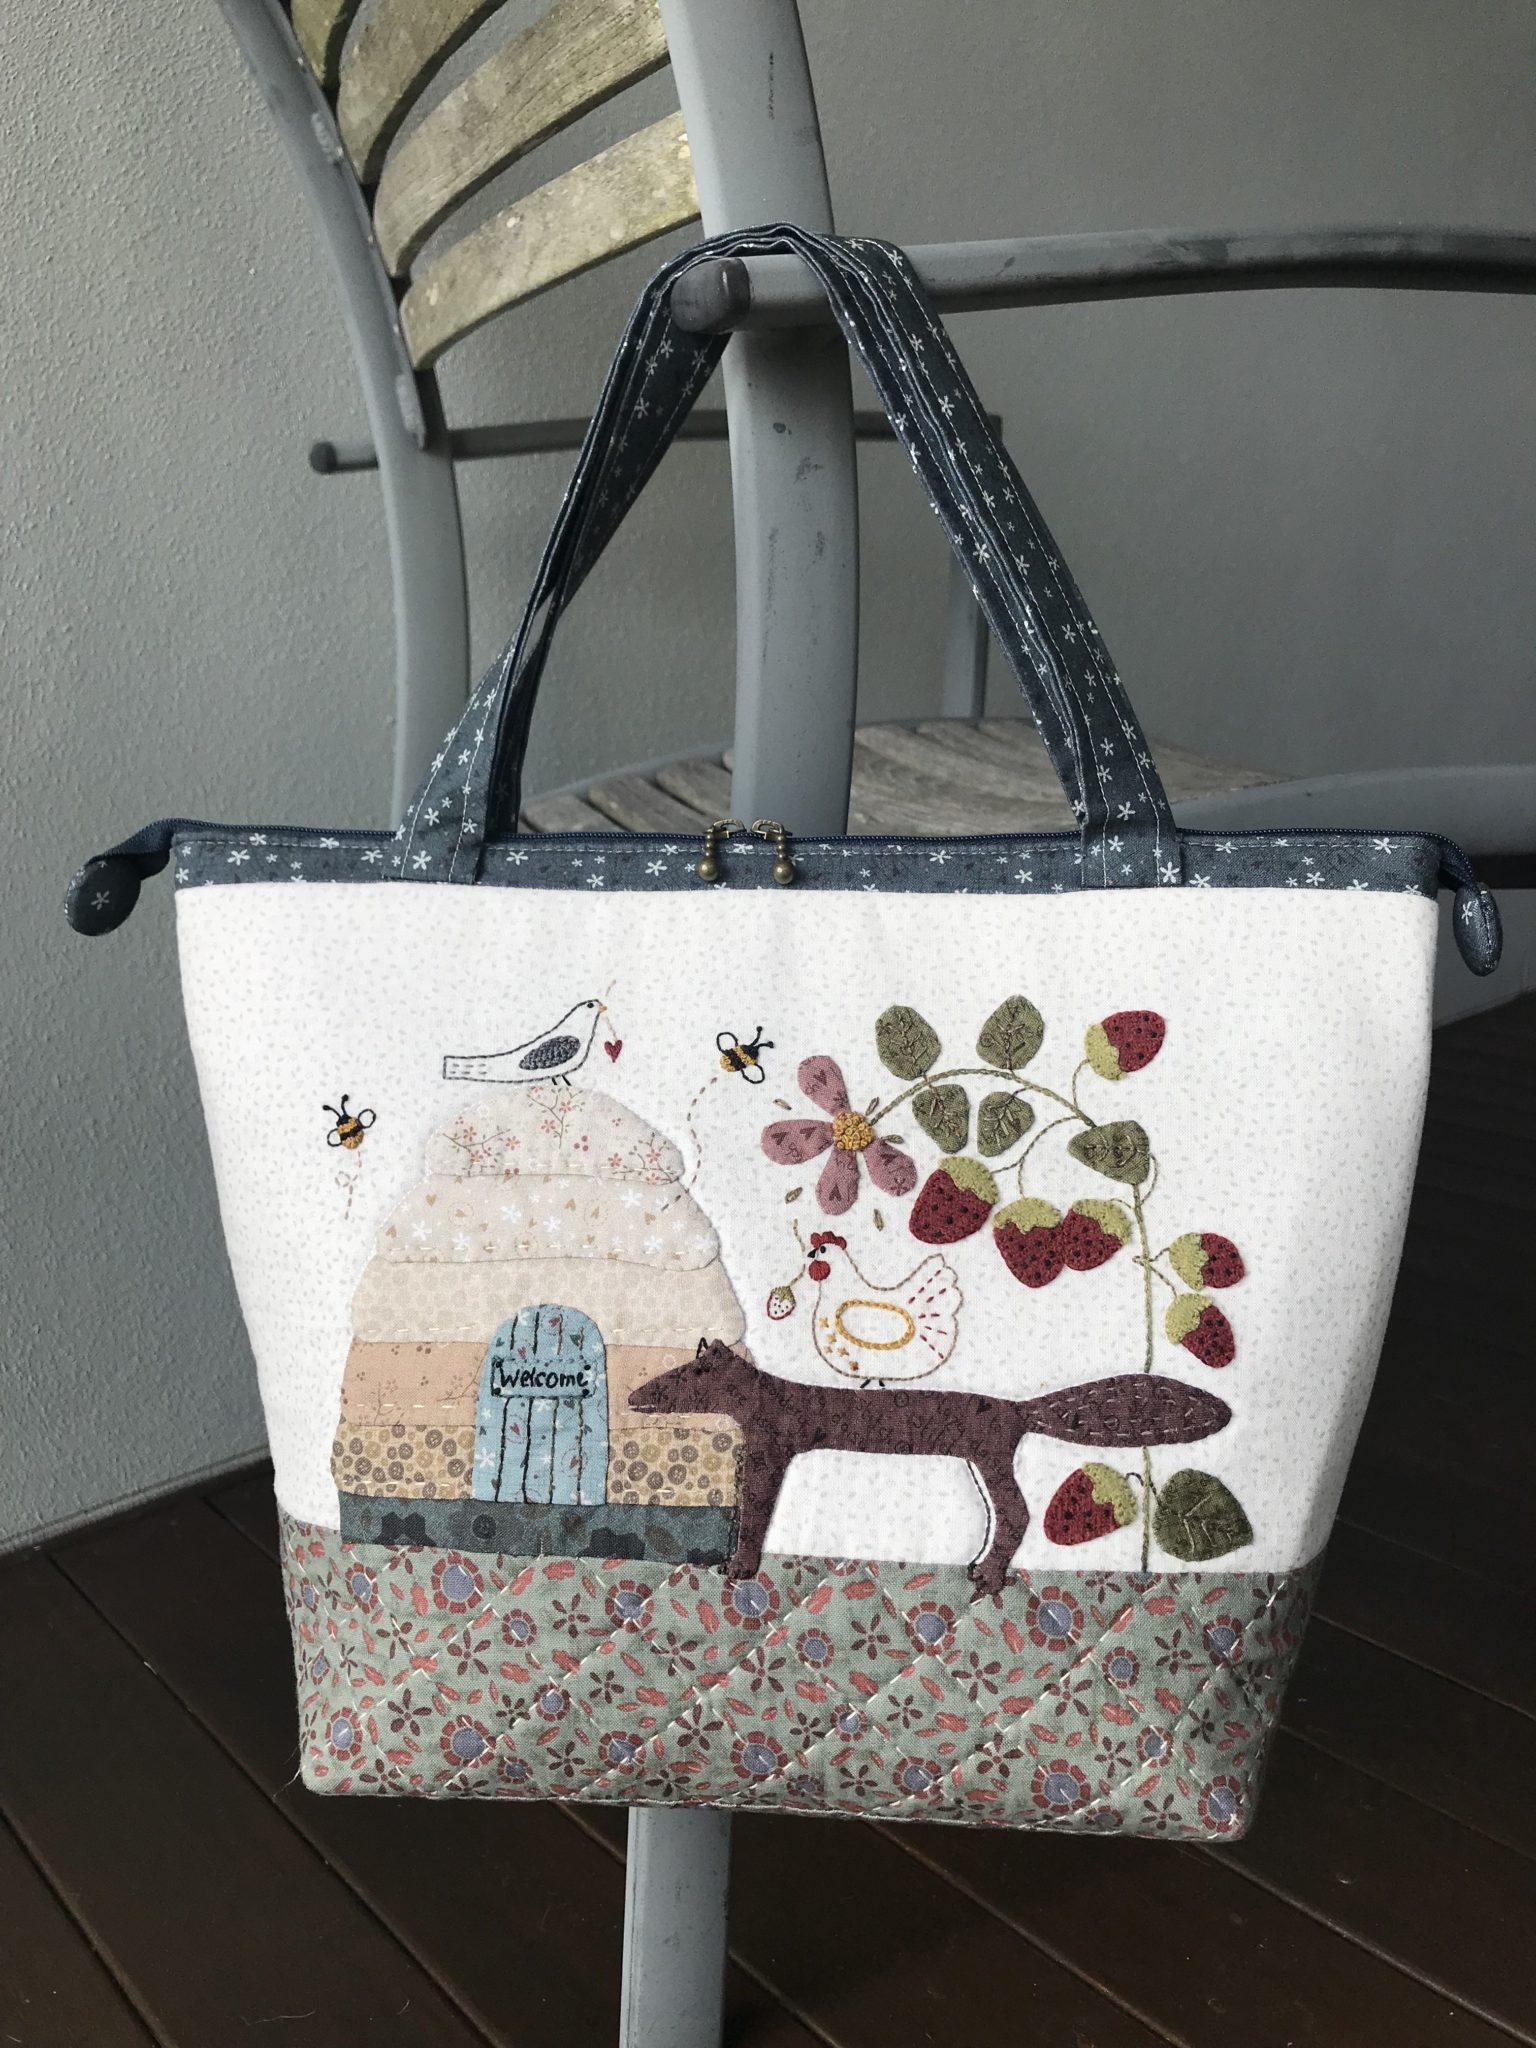 Strawberry Fox Bag pattern by Lynette Anderson - Coast & Country